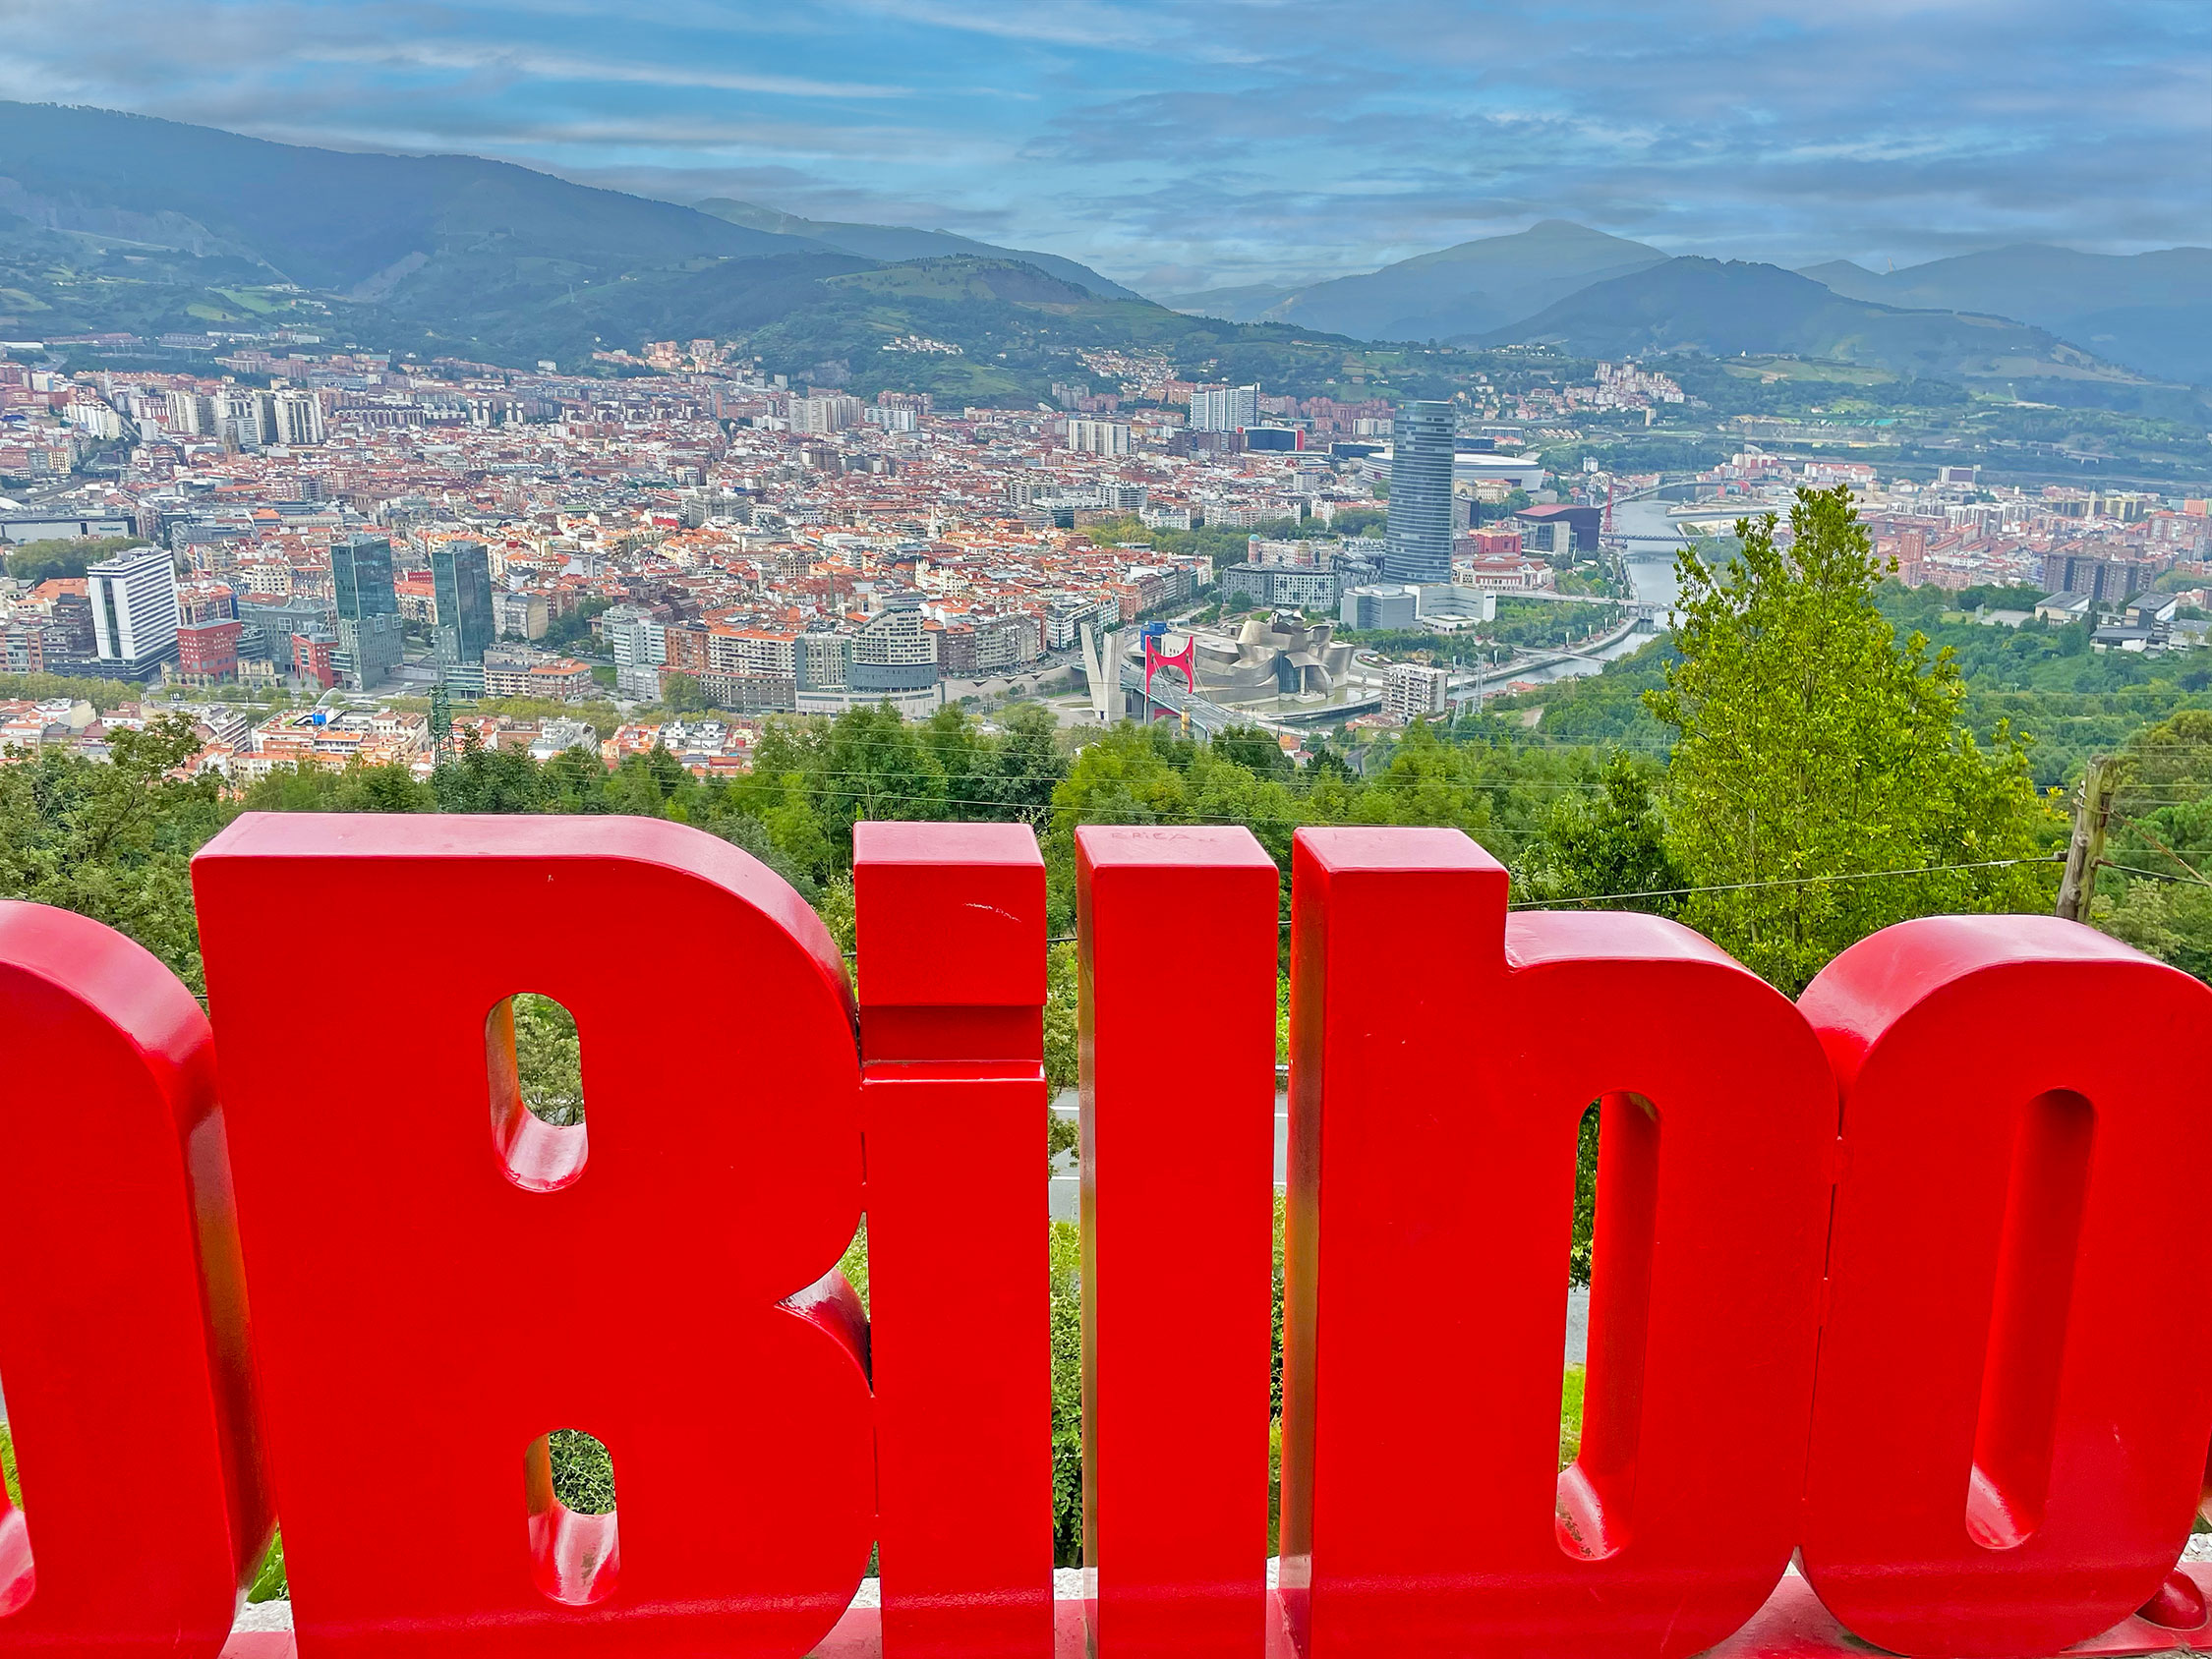 Visit Artxanda when in Bilbao, a recommendation by CÚRATE Trips